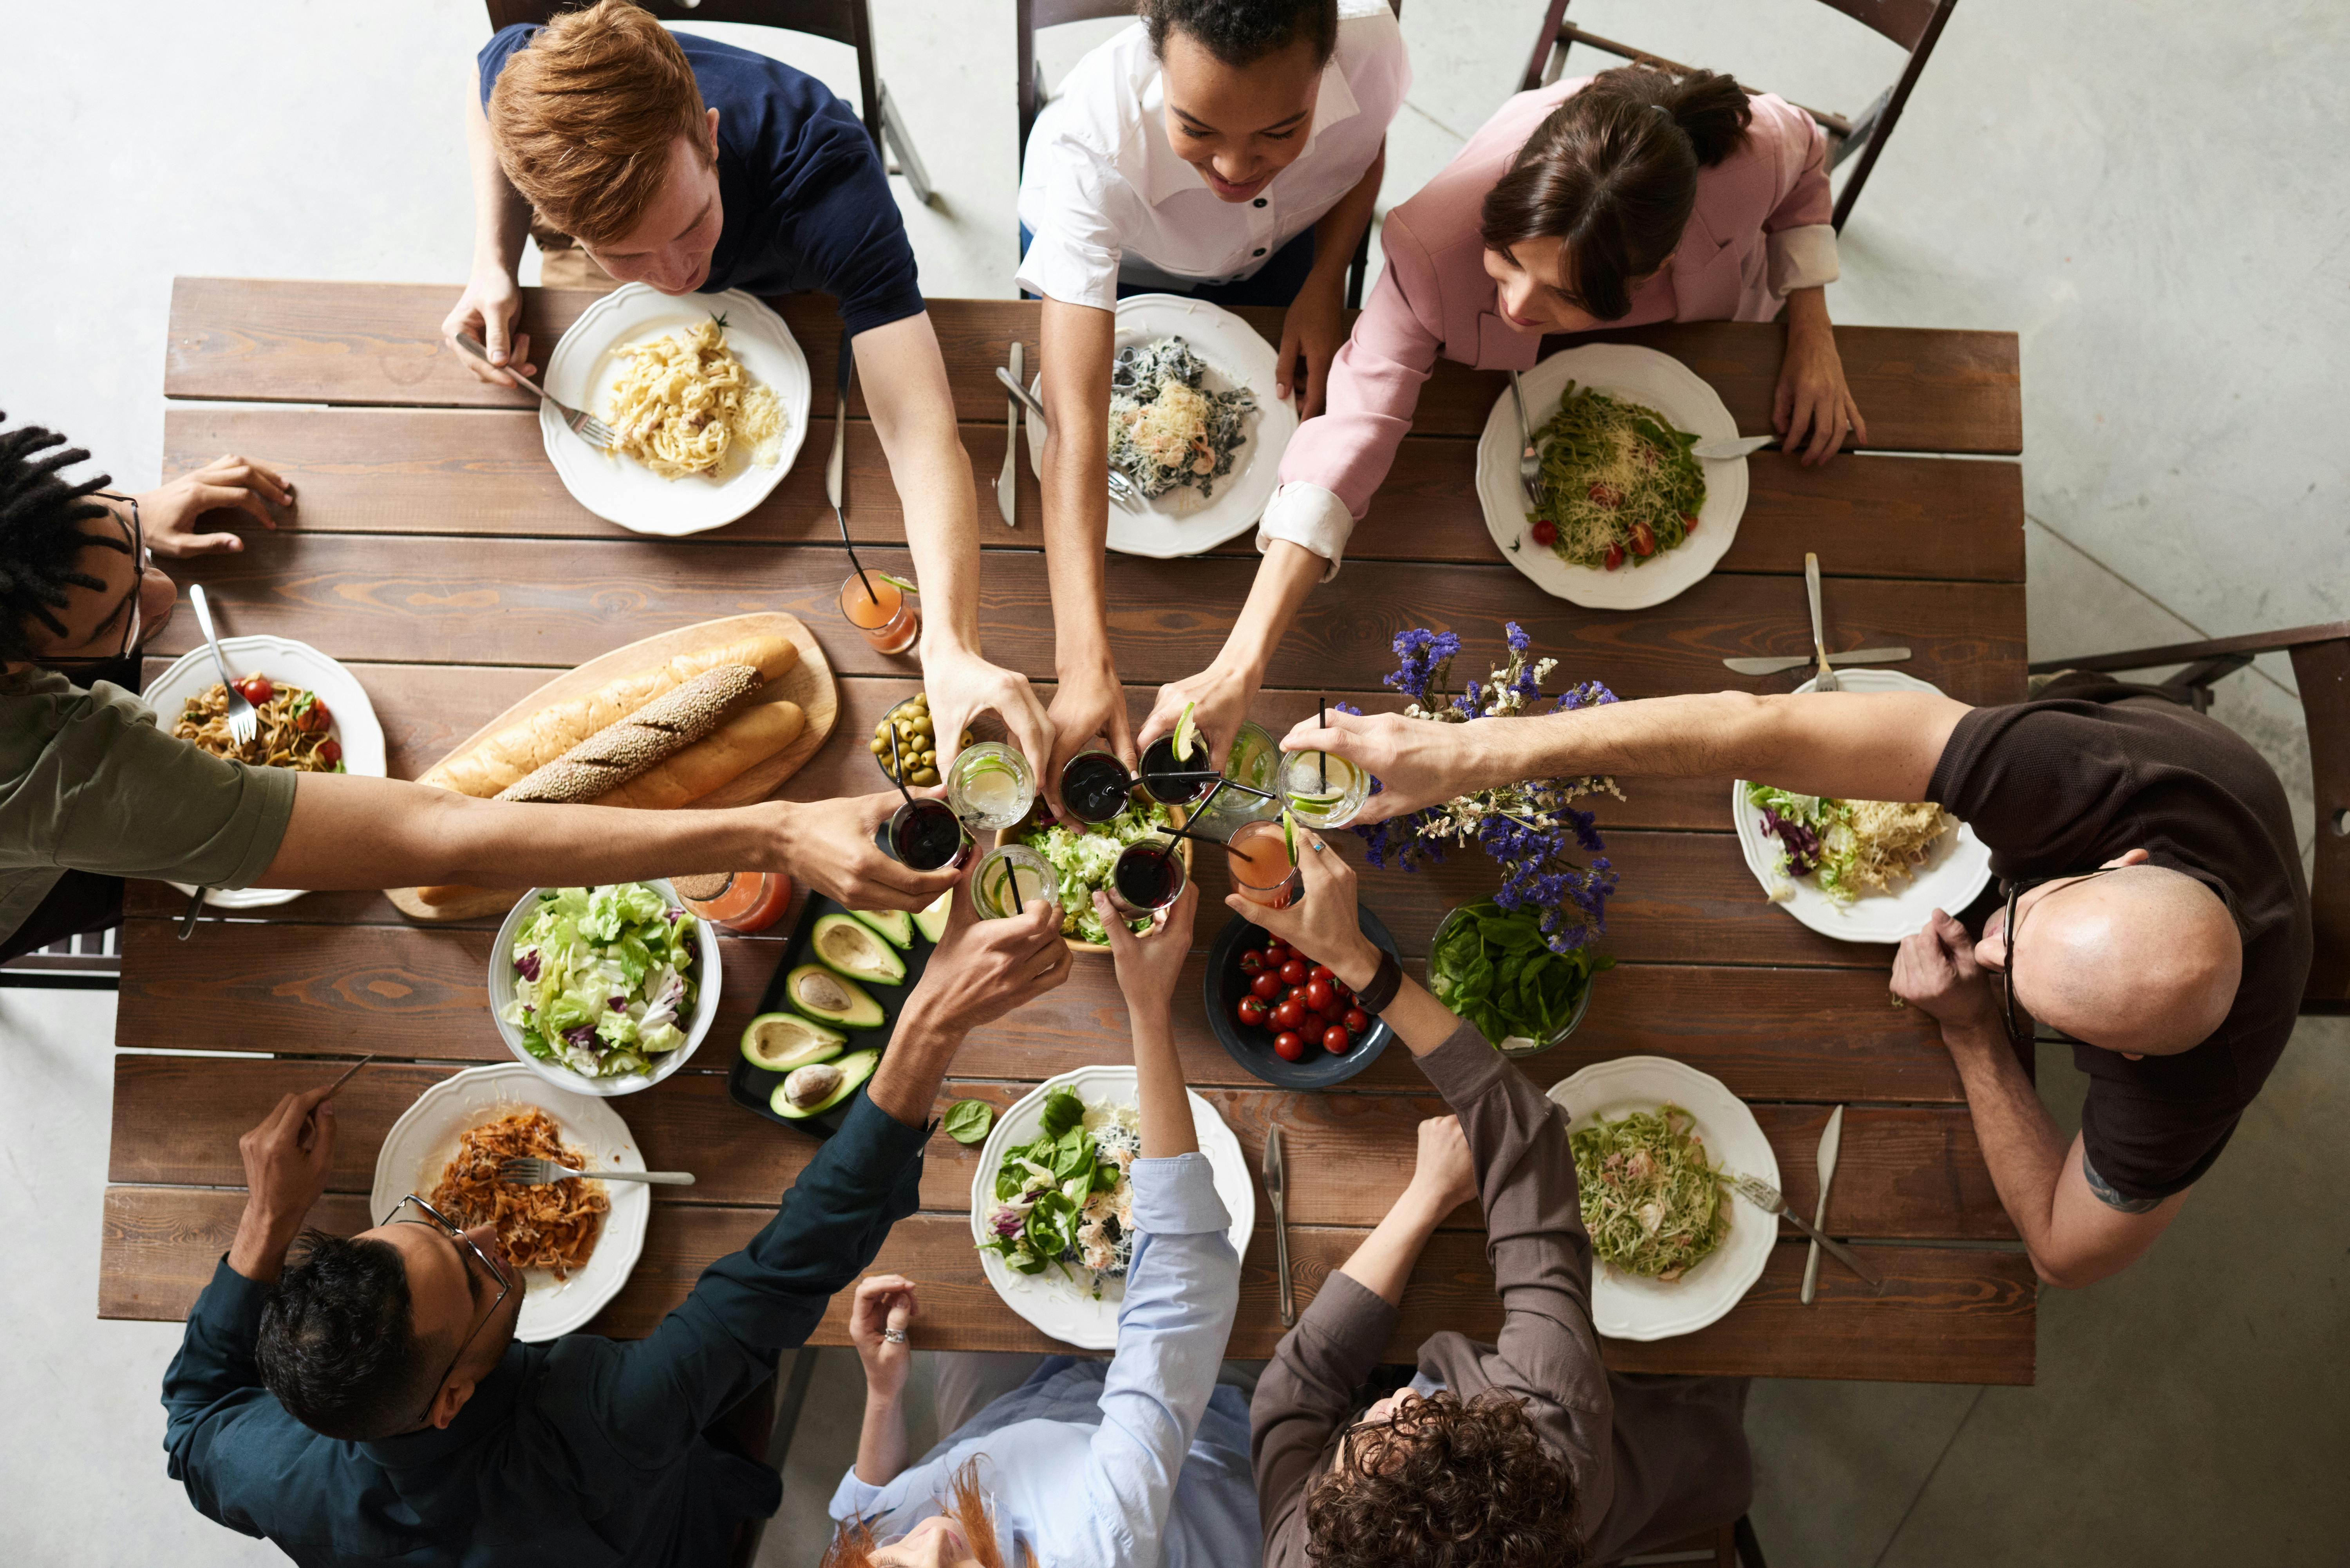 Friends and family gathered for dinner | Source: Pexels